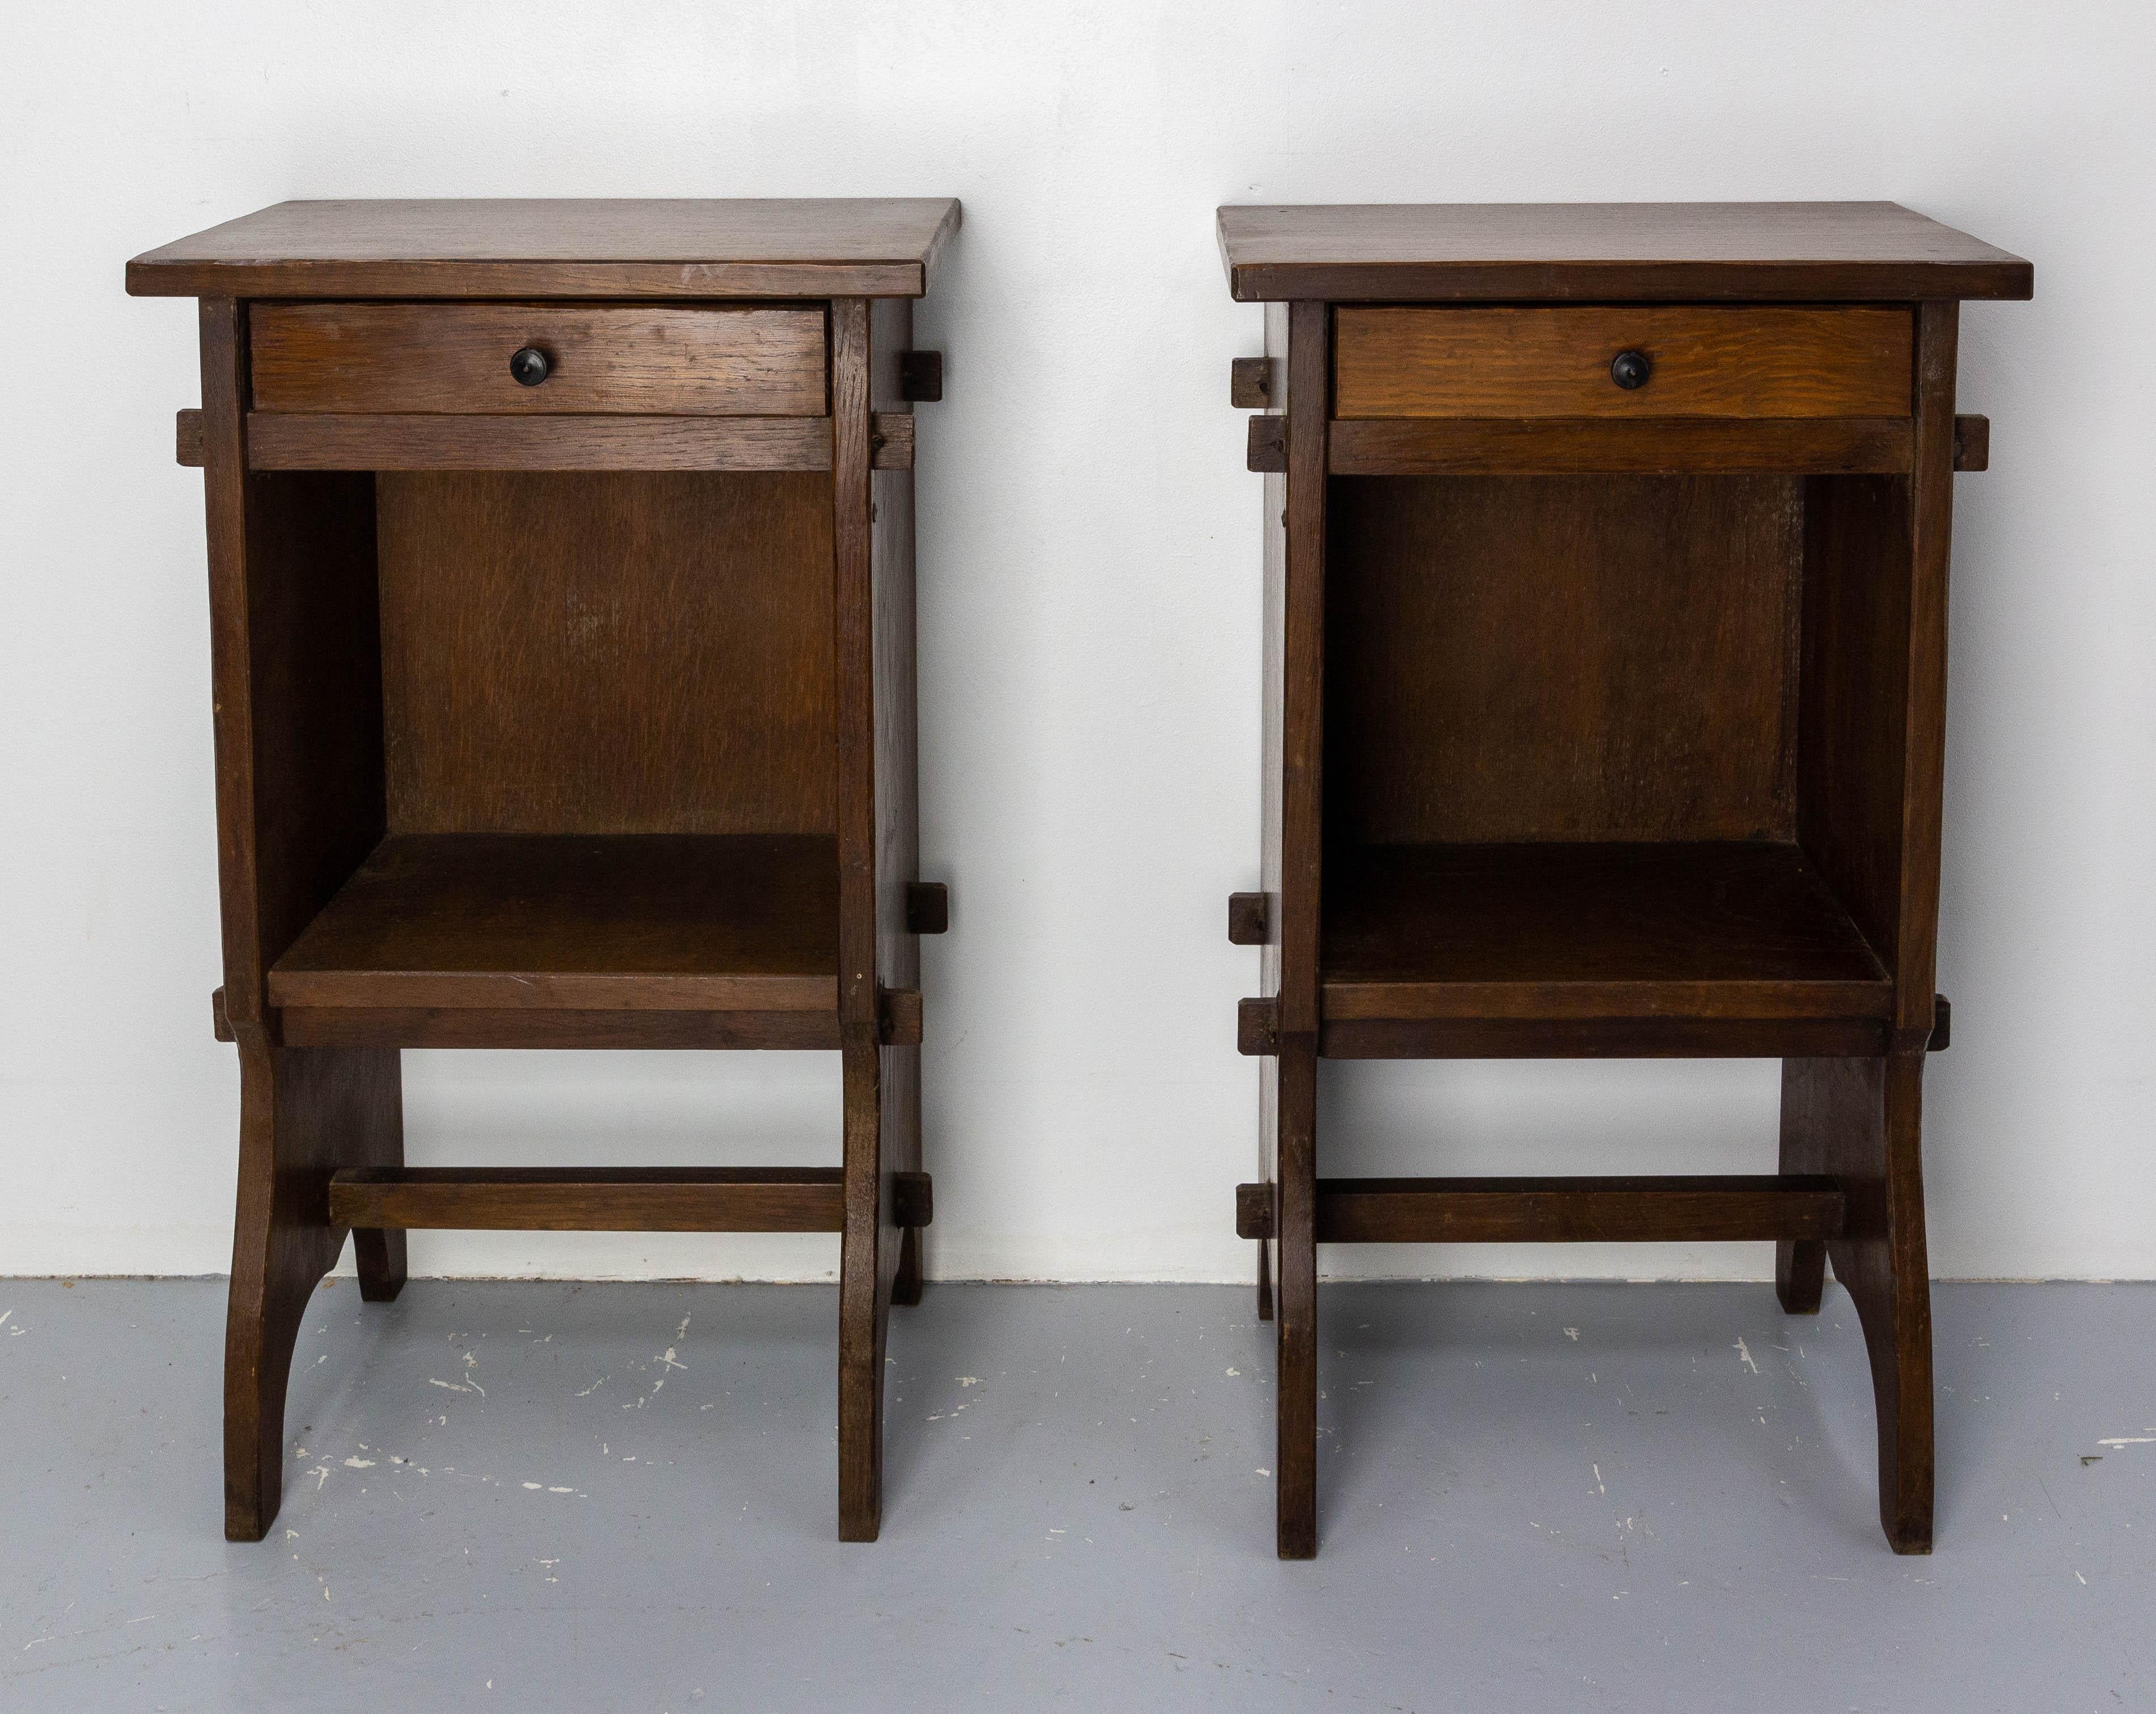 French parchment side cabinets nightstand.
Oak bedside tables.
Nightstands mid-century in the brutalist and Swiss Alp style.

Good condition.

Shipping: 
1 pack: 48 40 68 cm 14.6 kg.